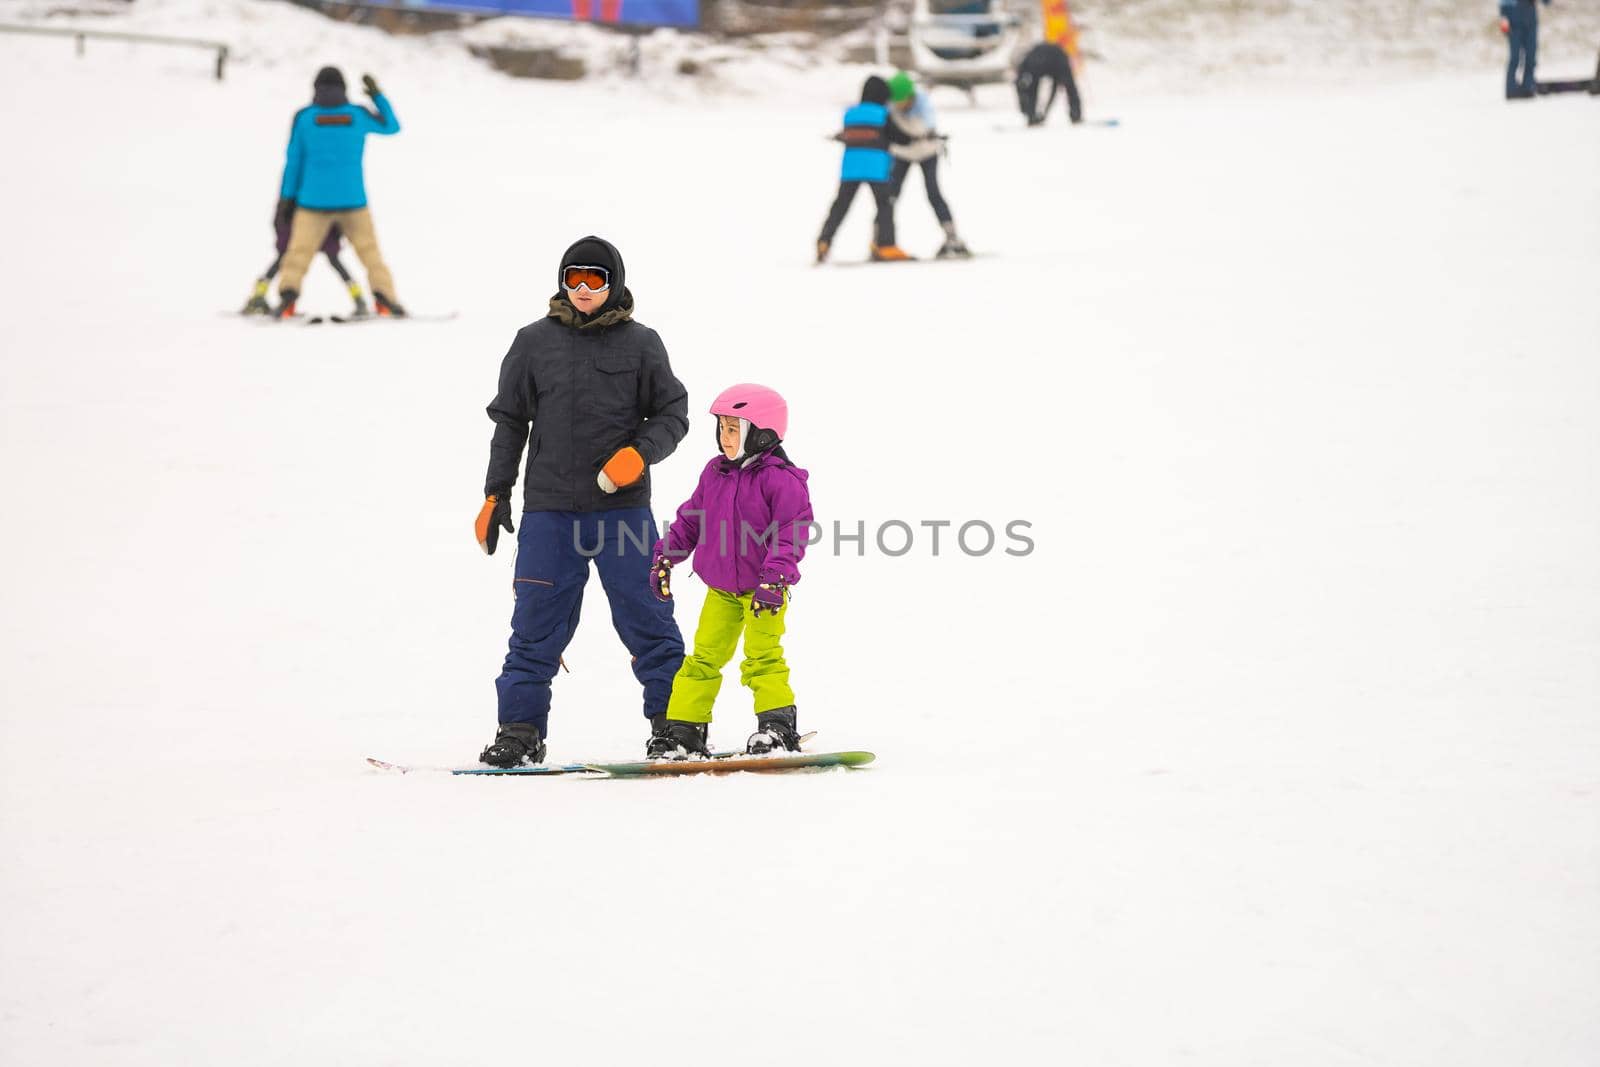 Instructors teach a child on a snow slope to snowboard by Andelov13